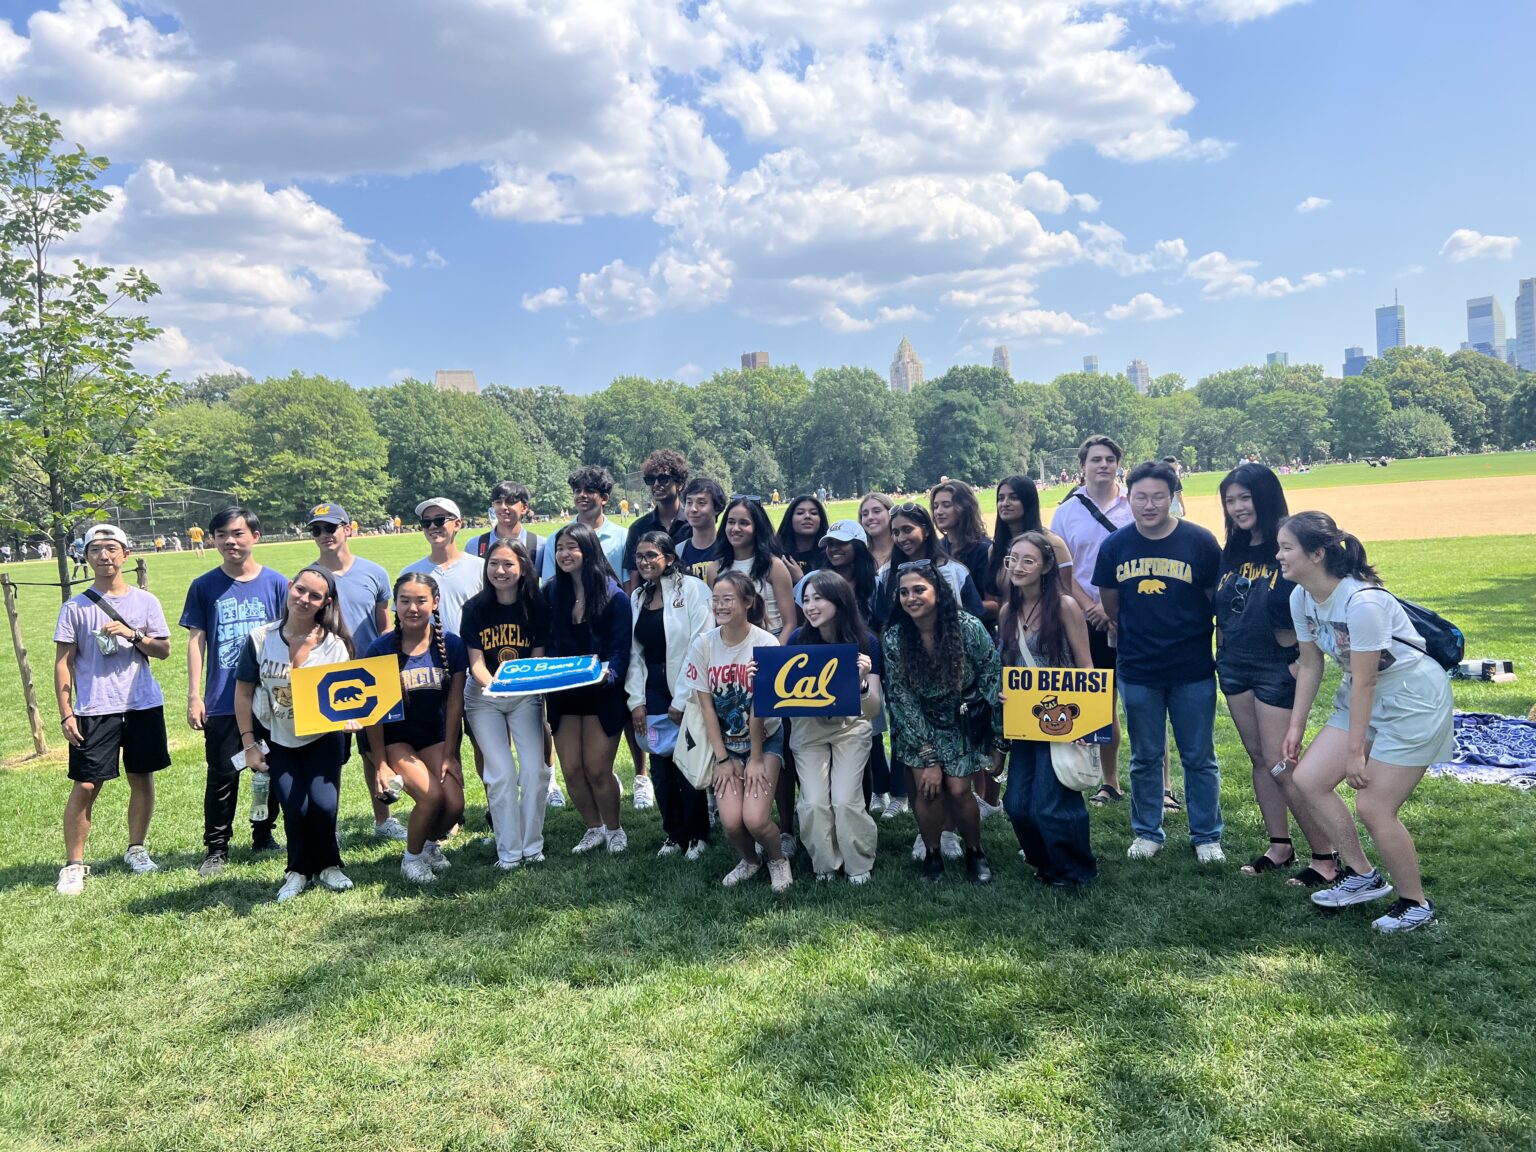 Attendees at the Cal Alumni Club of New York Summer Welcome Picnic pose with Cal signs.